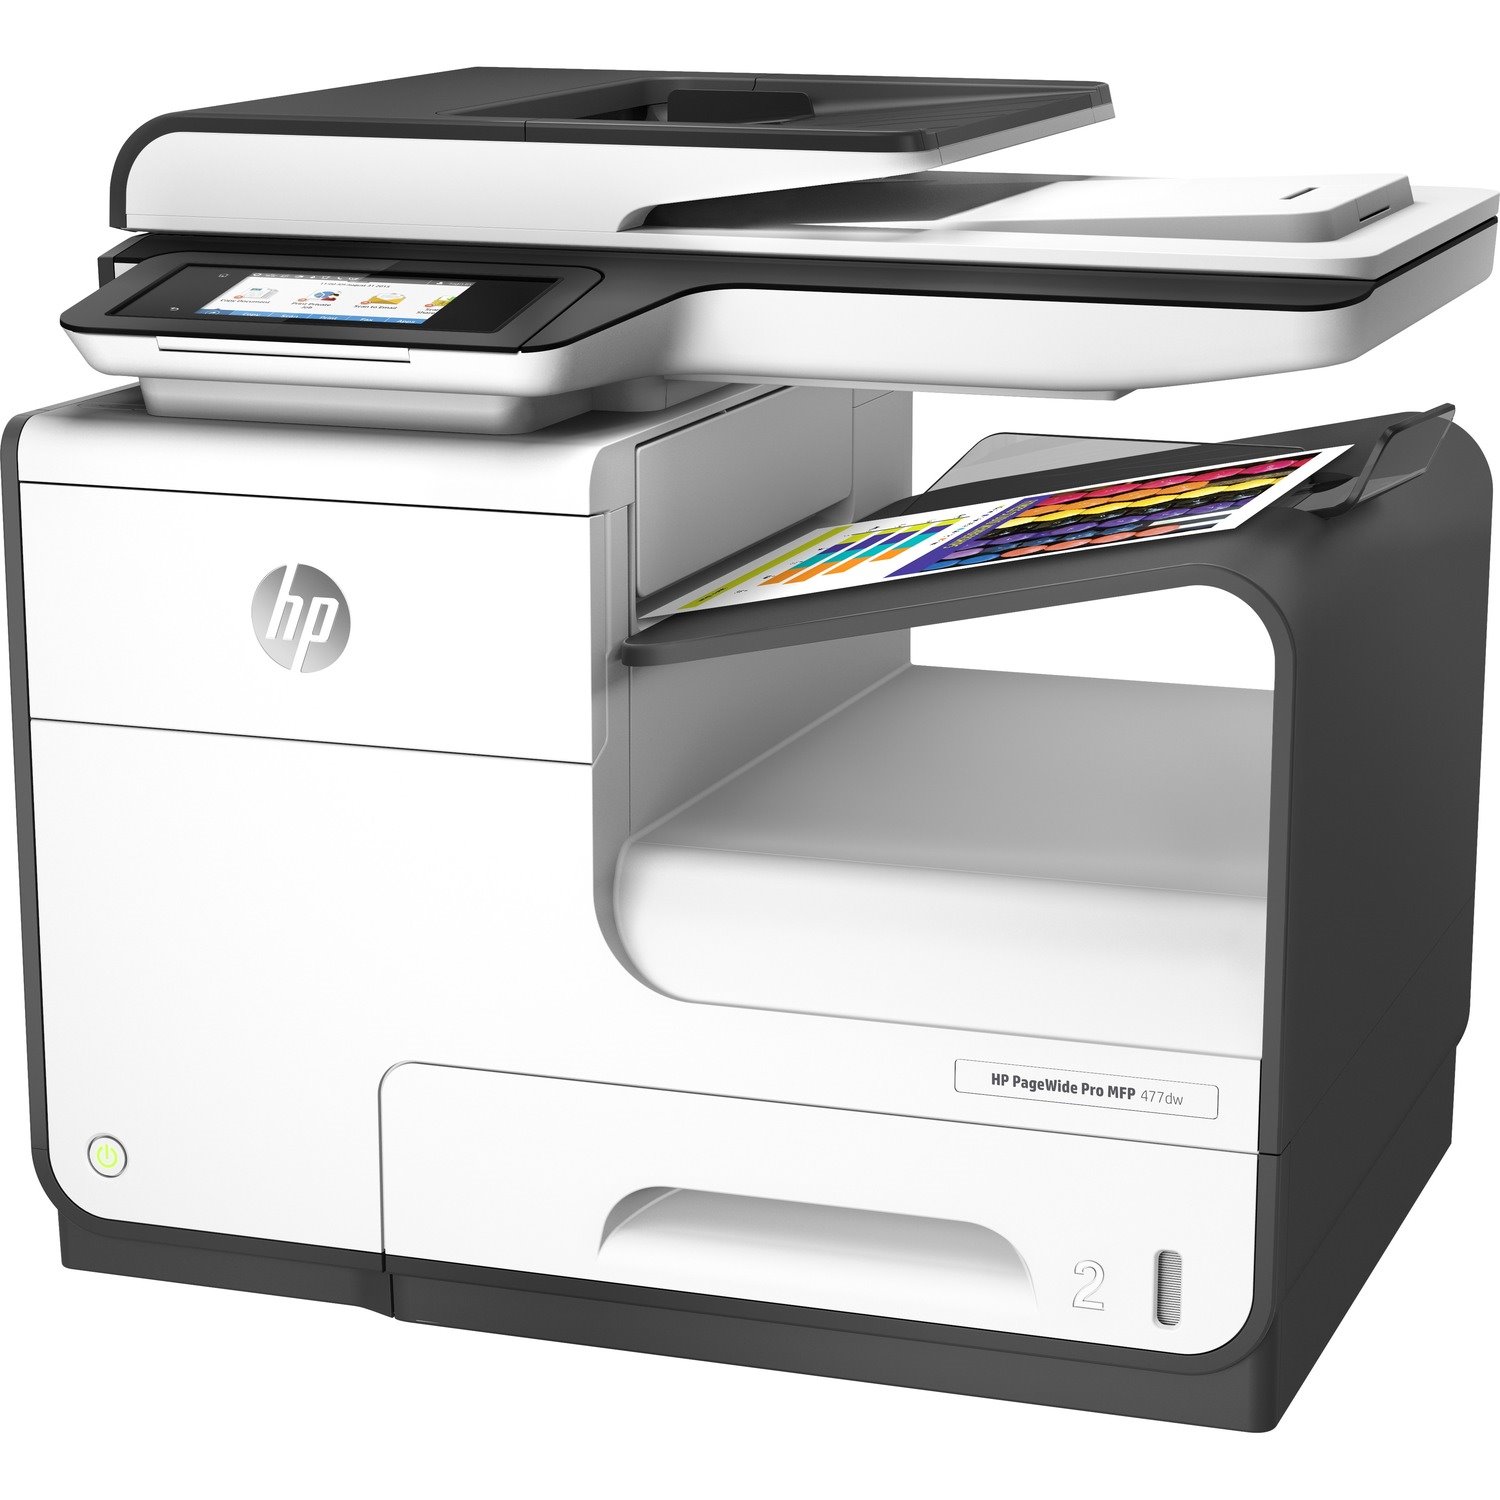 HP PageWide Pro 477dw Page Wide Array Multifunction Printer-Color-Copier/Fax/Scanner-40 ppm Mono/40 ppm Color Print-2400x1200 dpi Print-Automatic Duplex Print-50000 Pages-550 sheets Input-1200 dpi Optical Scan-Color Fax-Wireless LAN